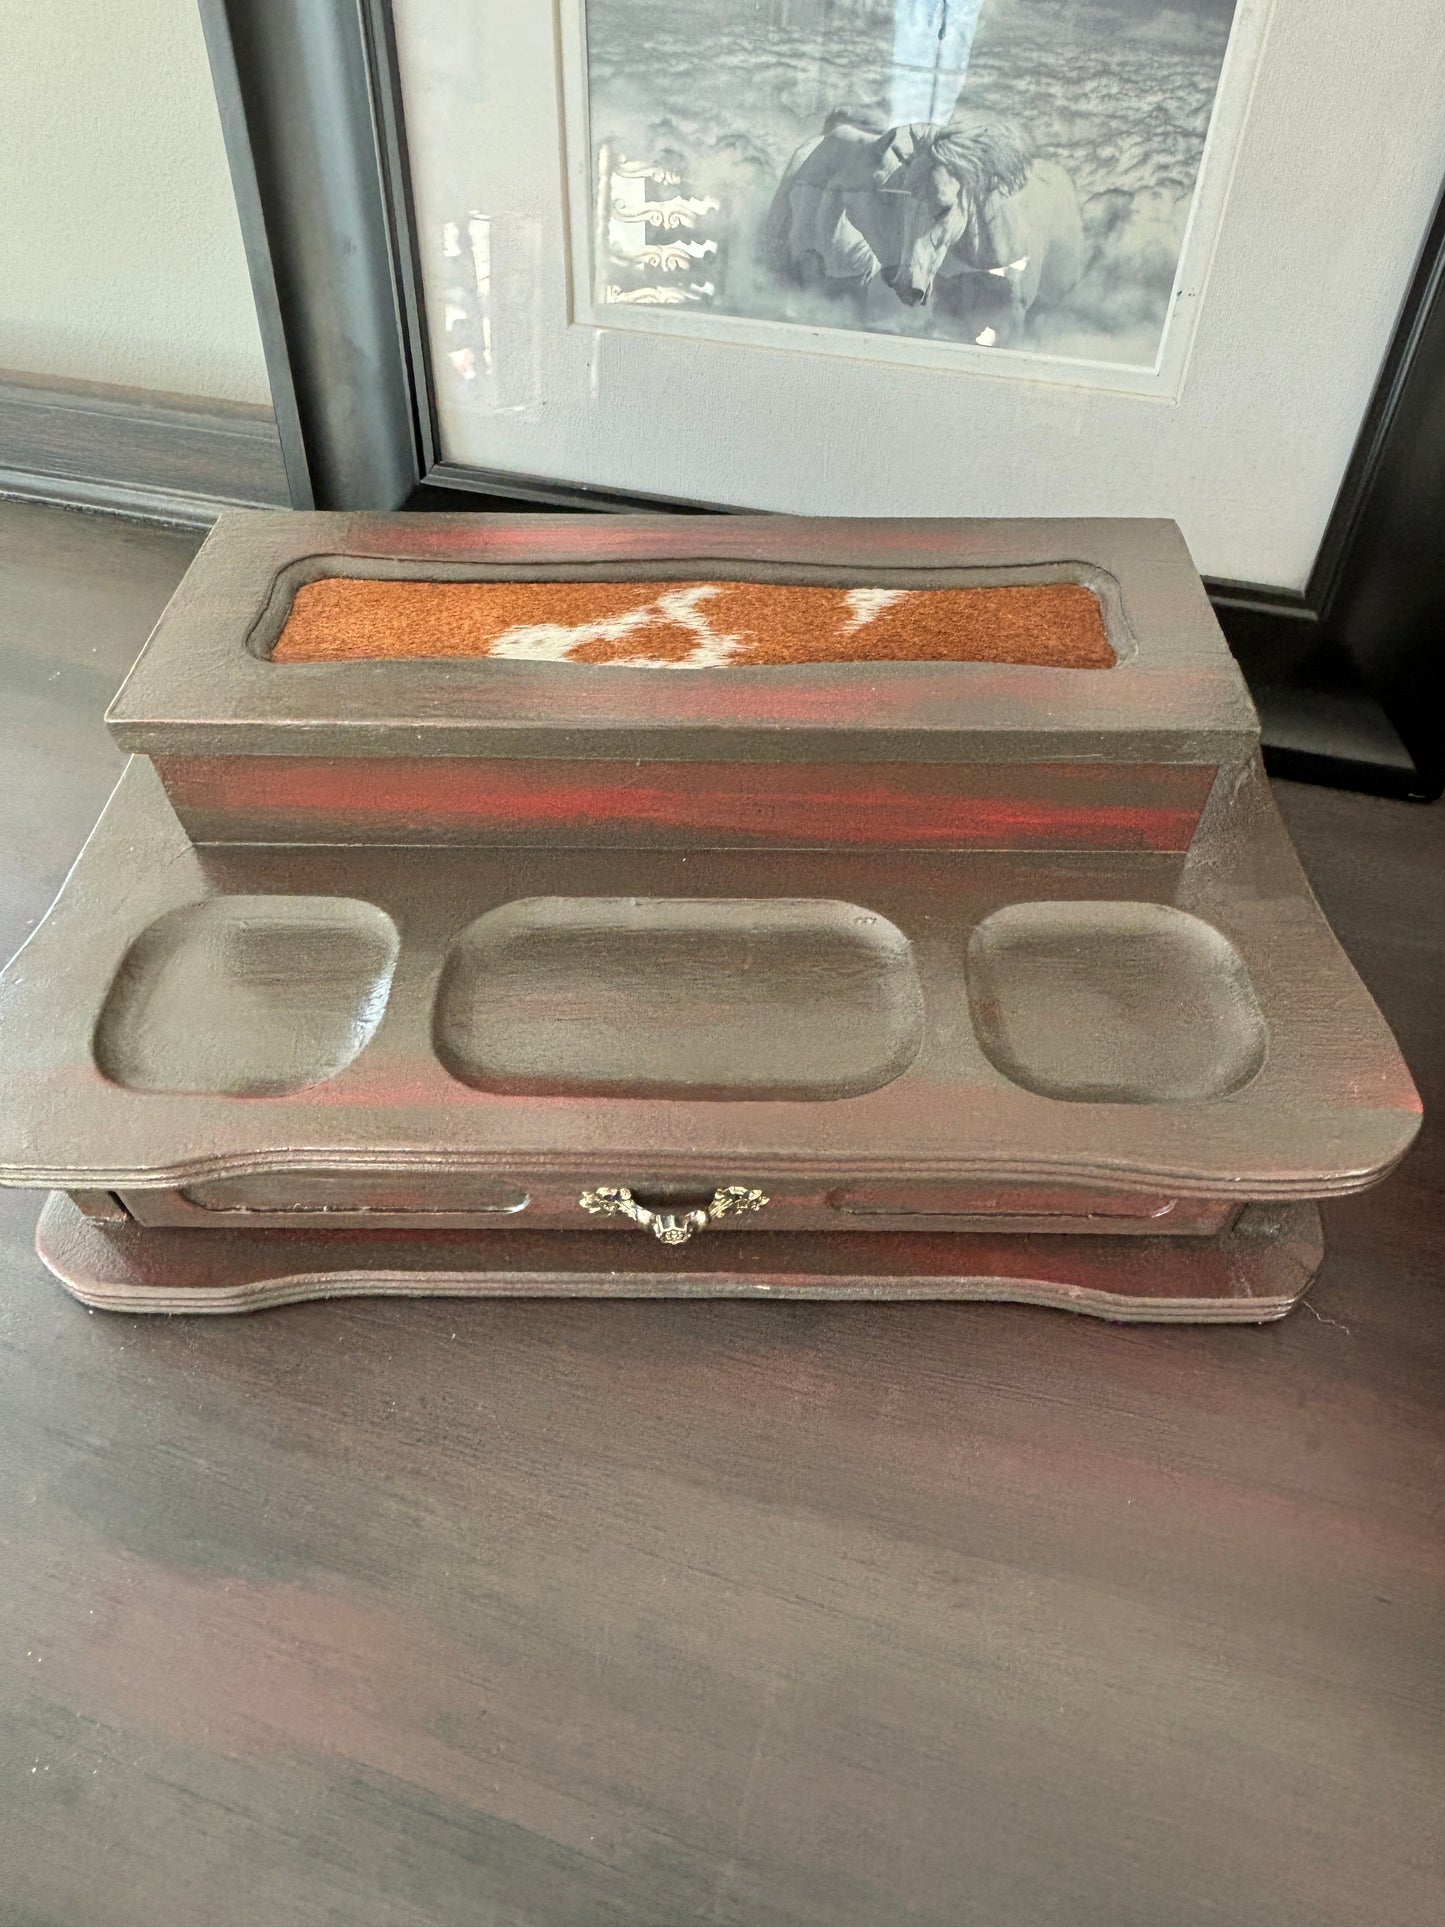 UpCycled Vintage Wood and Leather Valet Jewelry Box , Dresser Valet , Vintage Jewelry Box , Valet Tray Organizer